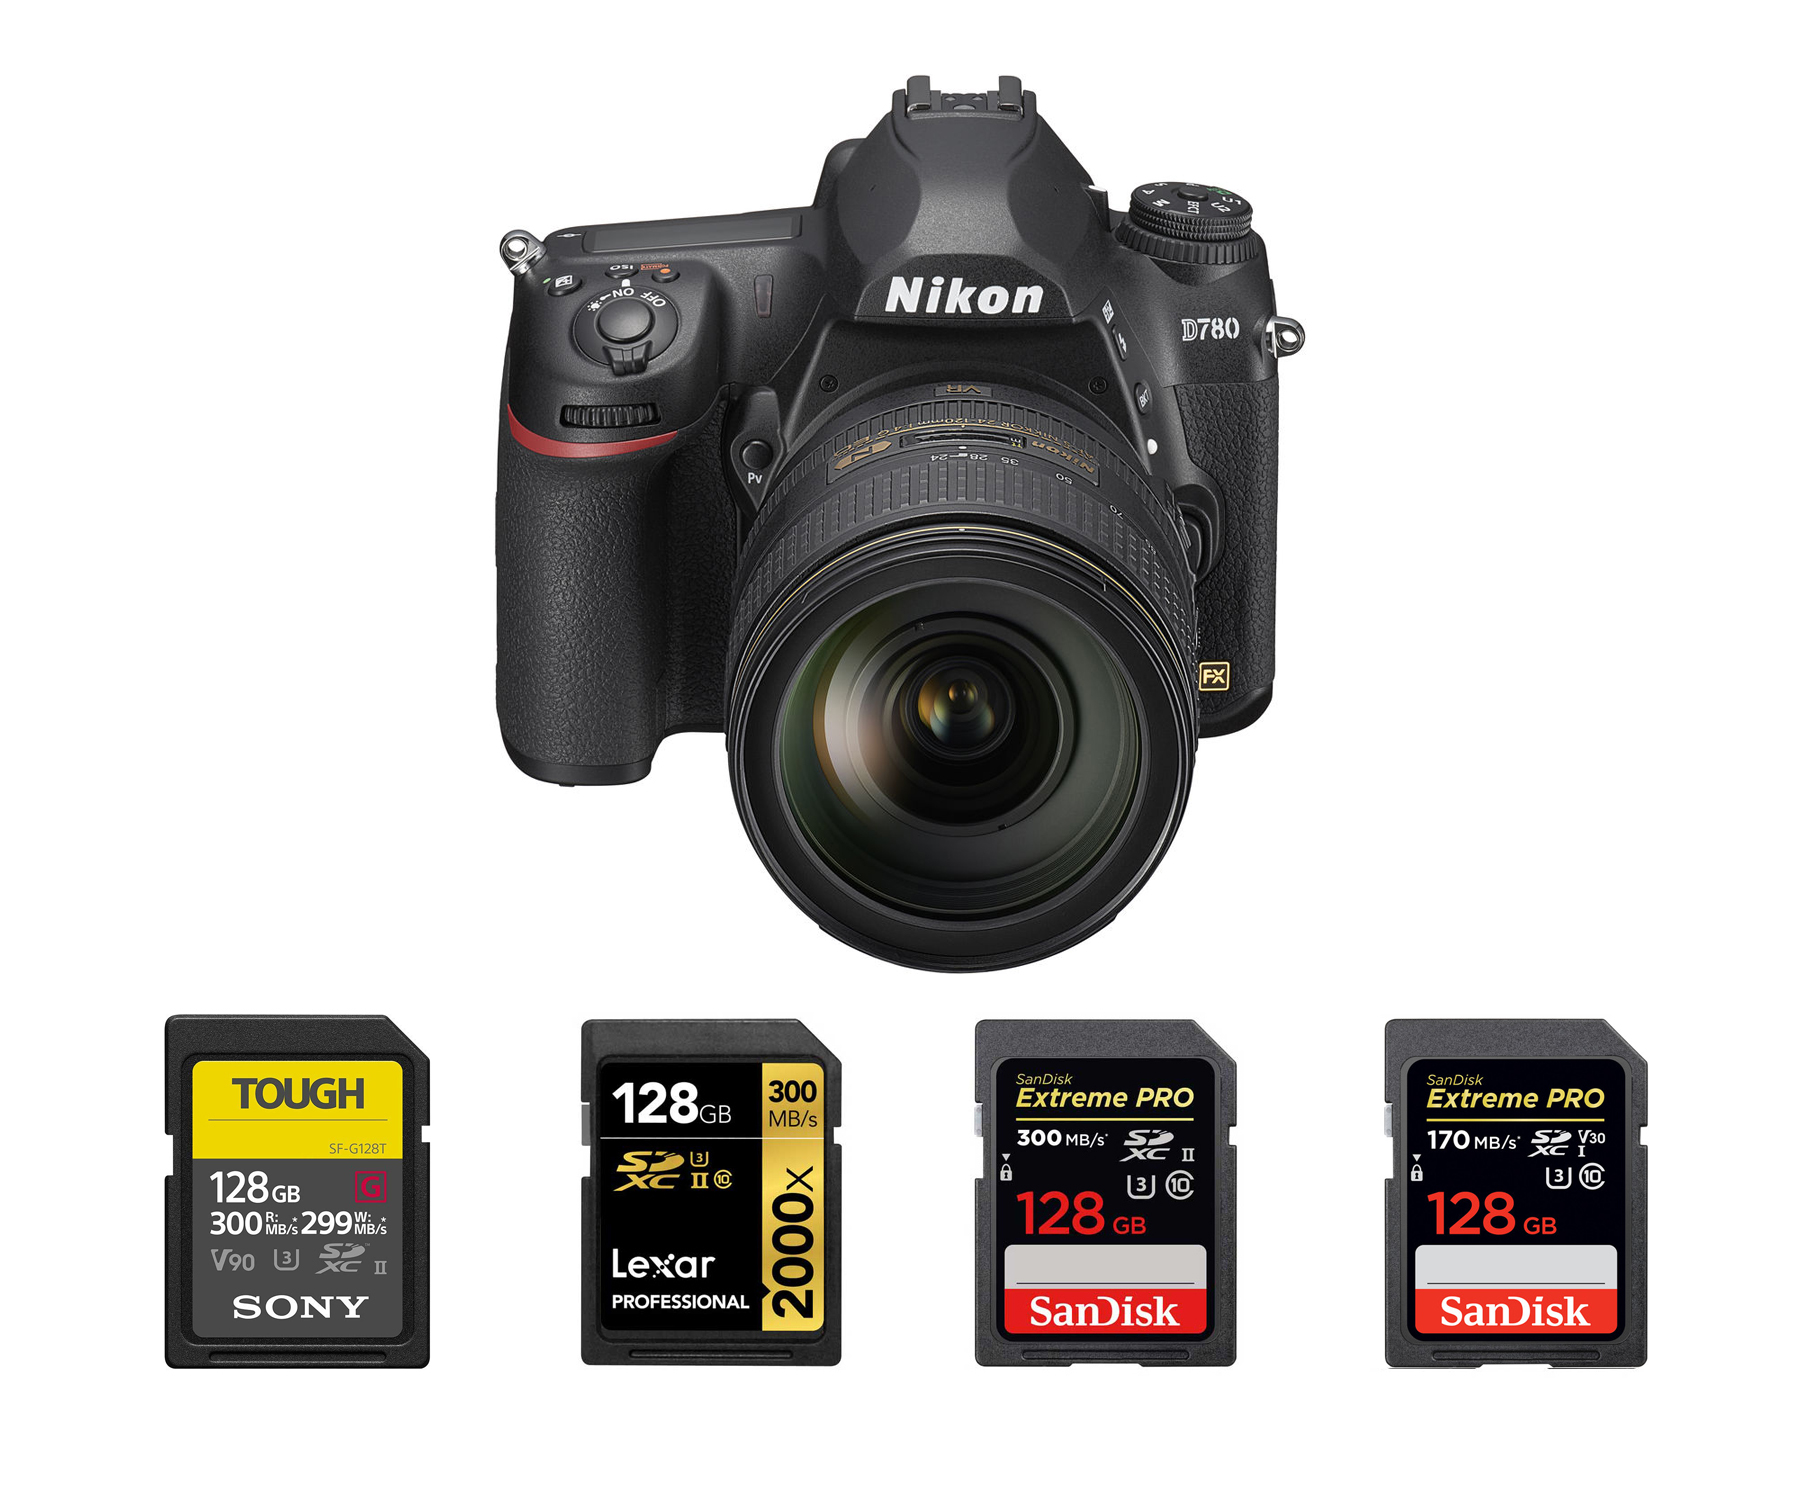 SDSDXXY-512G-GN4IN Z5 Mirroless SanDisk Extreme Pro 512GB SD Card for Nikon Camera Works with Nikon Z50 D780 Digital DSLR Everything But Stromboli Micro & SDXC Memory Card Reader 1 Bundle with 